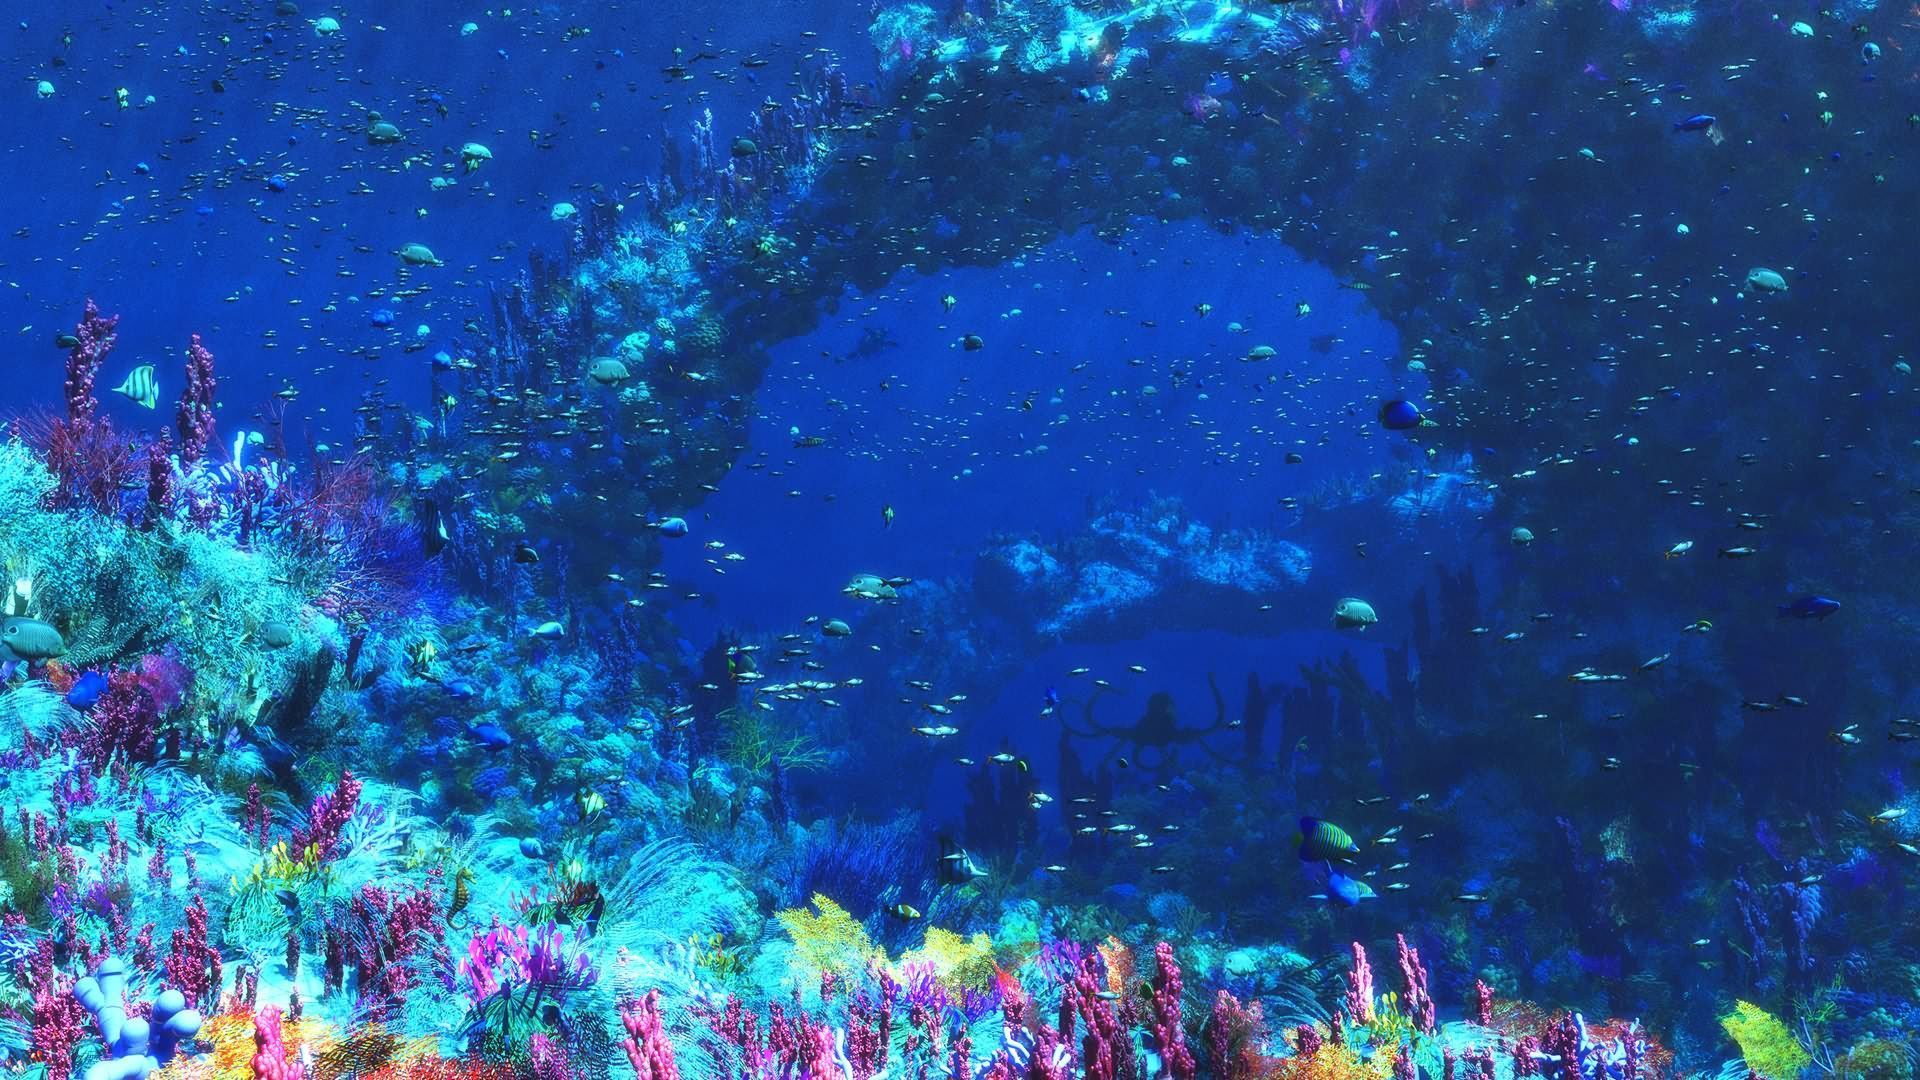 Coral reef with fish and anemones in the background - Underwater